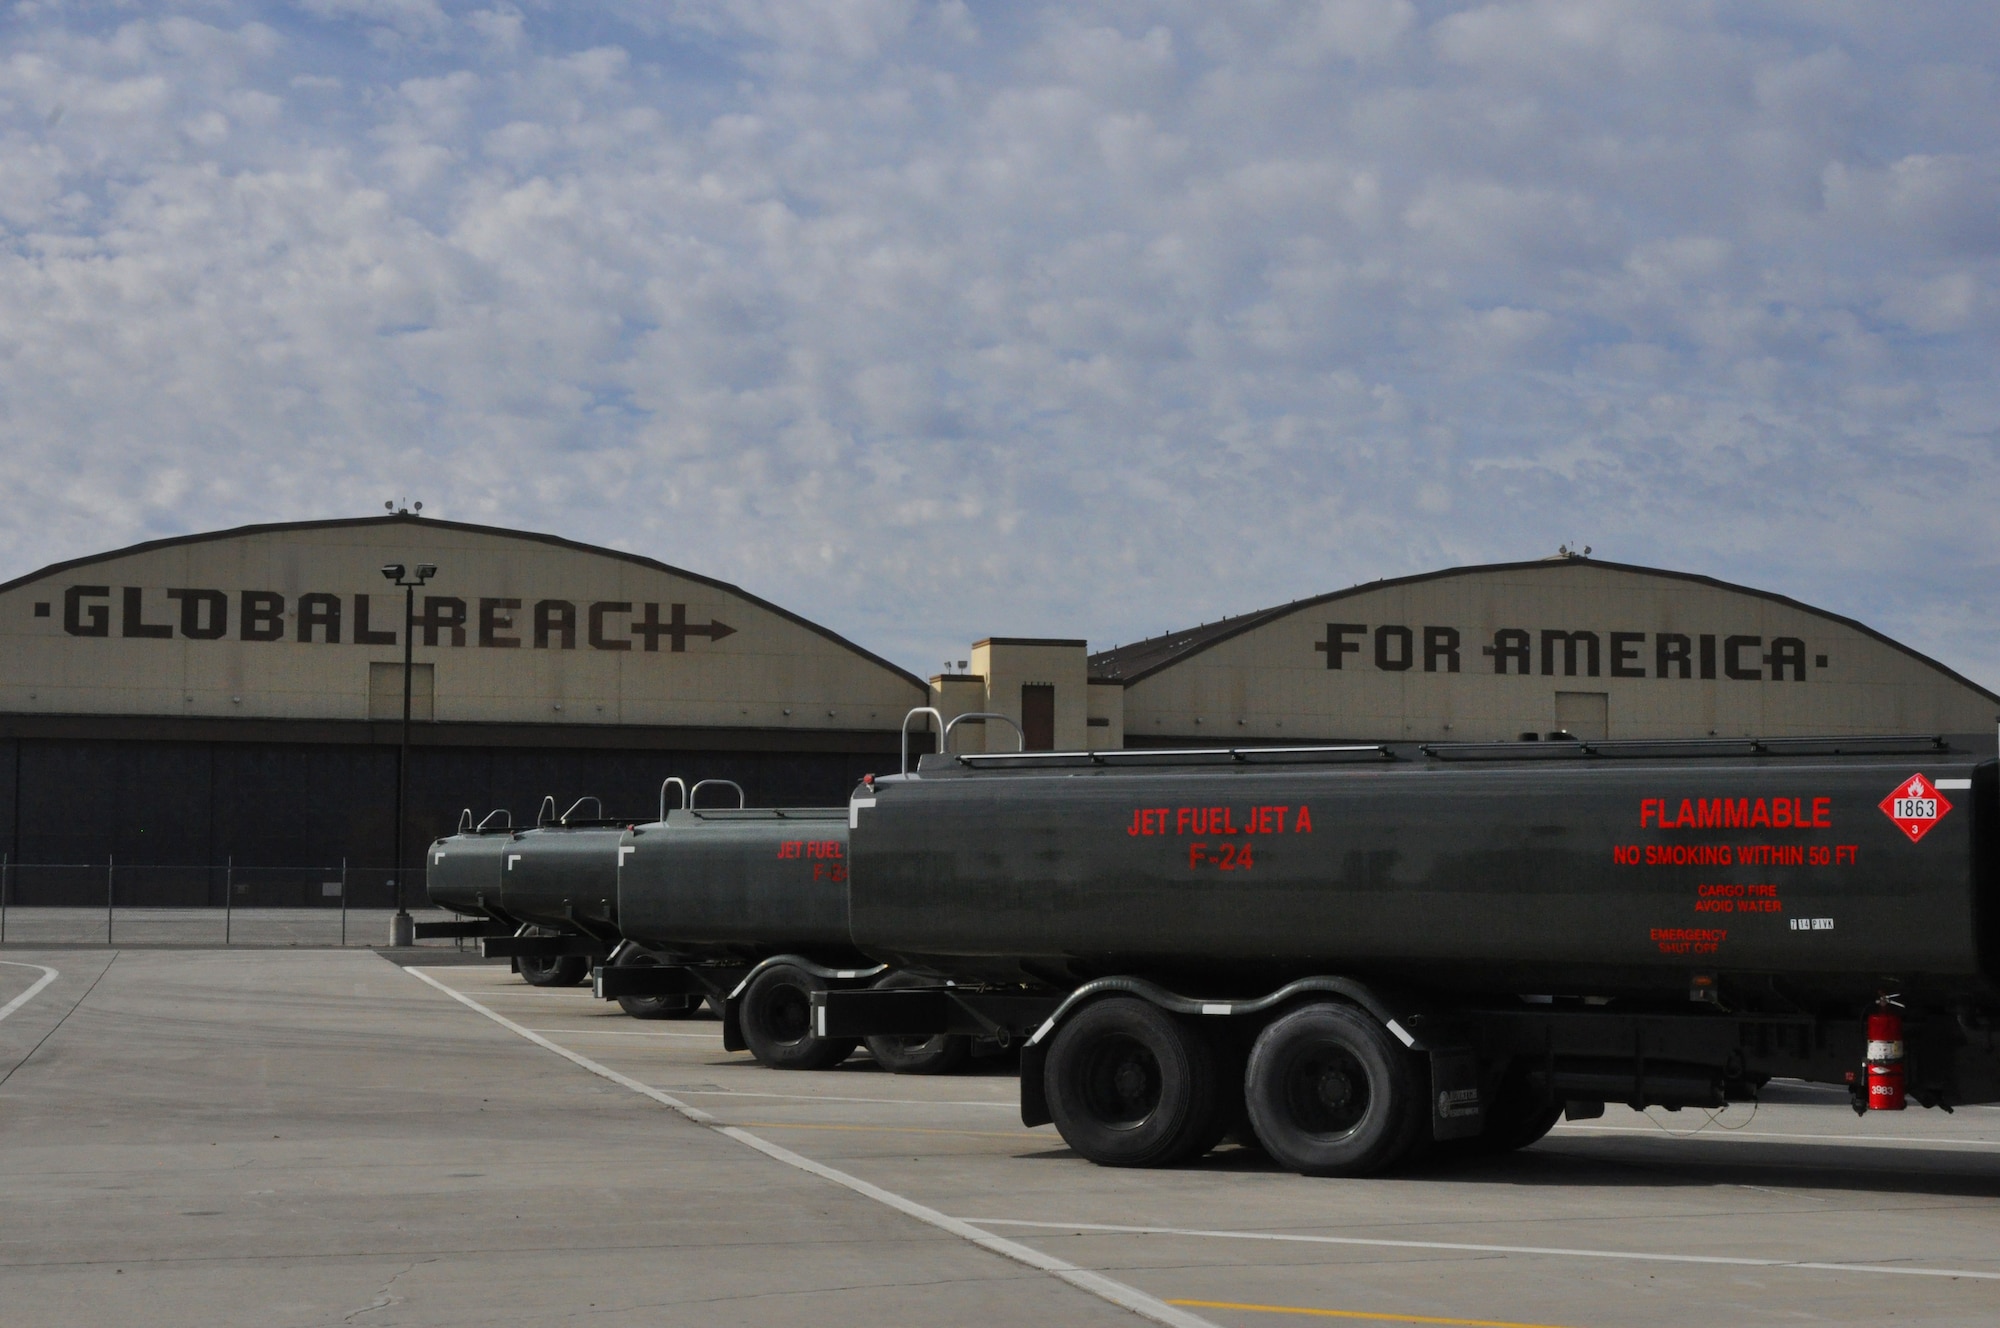 A fleet of R-11 fuel trucks is parked in the 92nd Logistics Readiness Squadron vehicle yard Feb. 18, 2015, at Fairchild Air Force Base, Wash. The “Global reach for America” theme of the 92nd and 141st Air Refueling Wings is supported by many functions, one of the primaries being the Petroleum, Oil and Lubricants flight responsible for filling KC-135 Stratotankers with fuel both for use and refueling other planes. (U.S. Air Force photo/Capt. David Liapis)